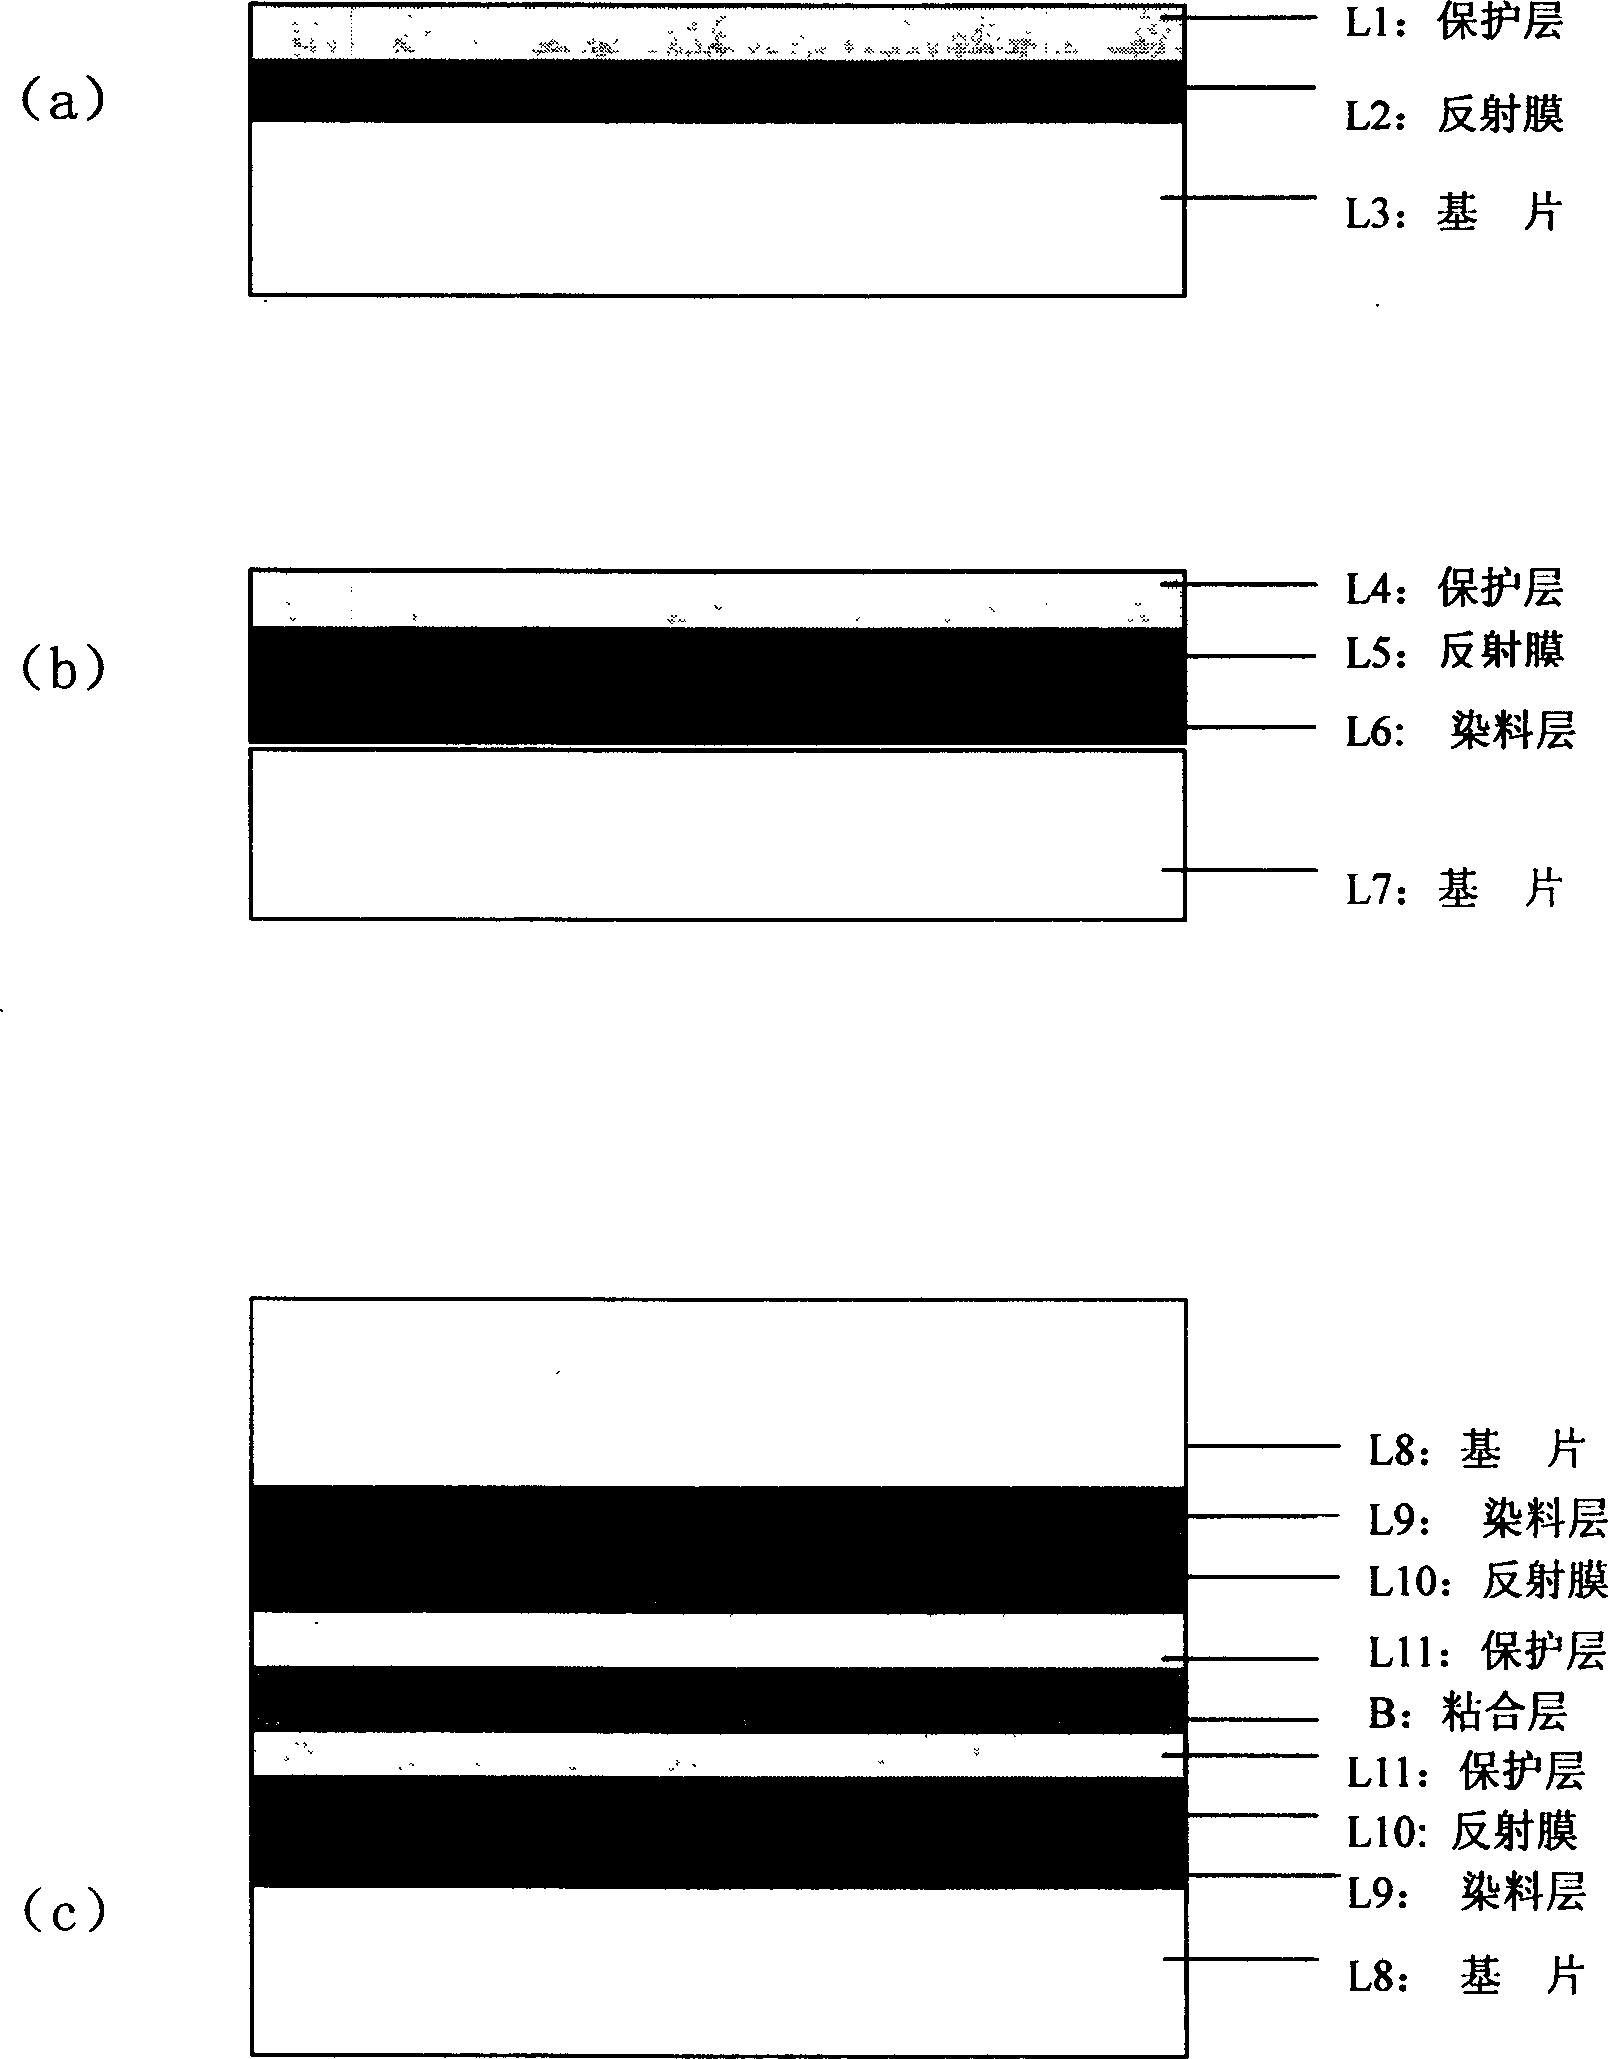 Process for reclaiming polycarbonate substrate from abandoned optical discs